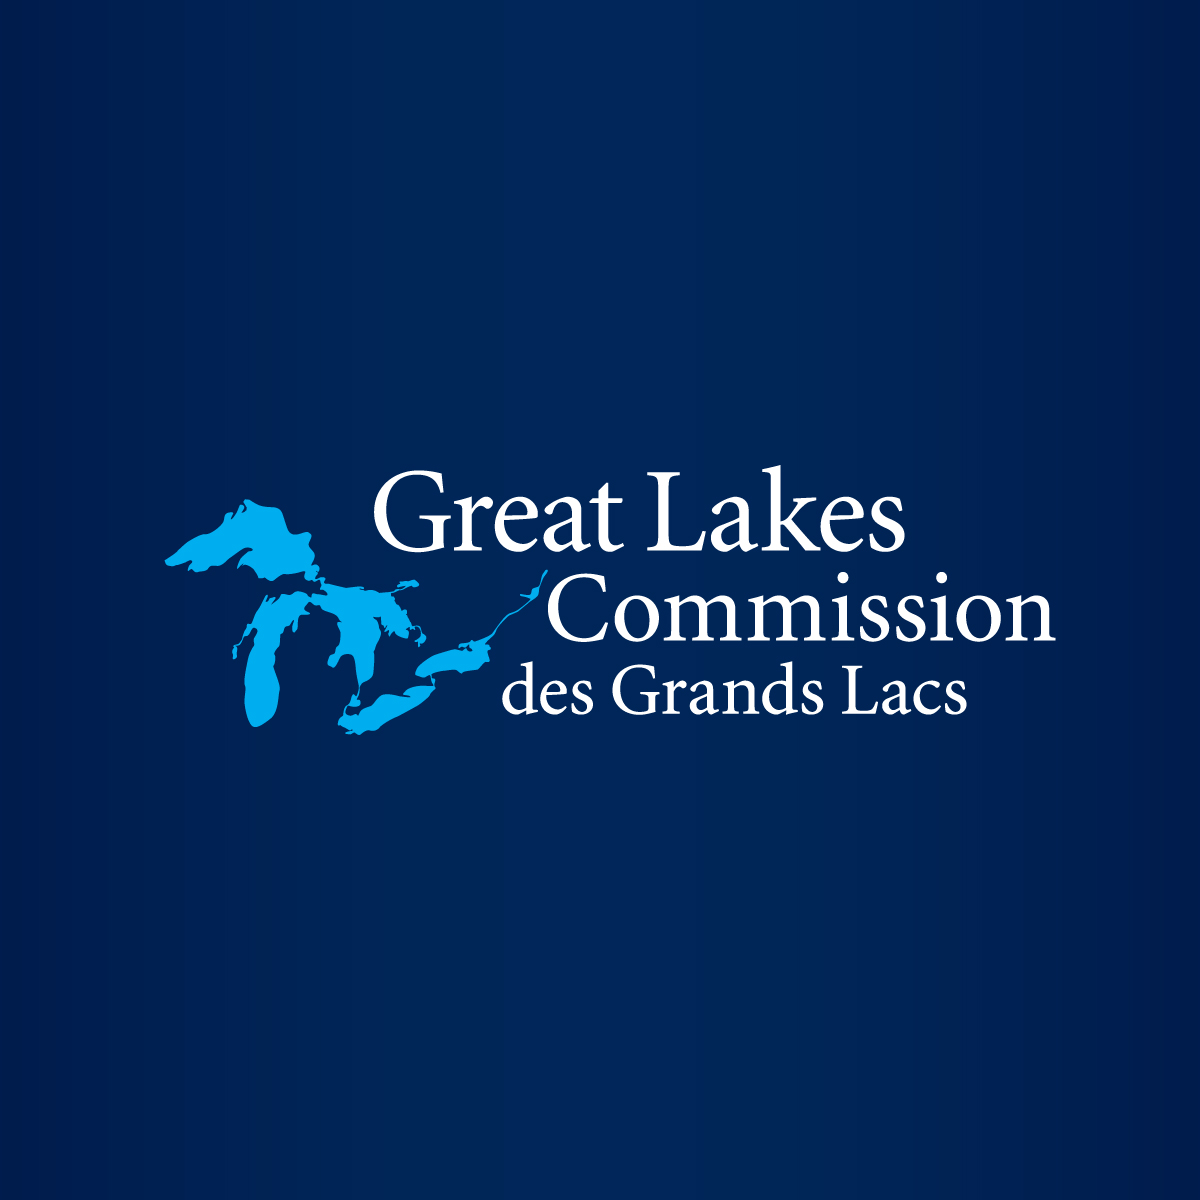 Great Lakes cruise experts are in Buffalo discussing the economic impact of a possible new port